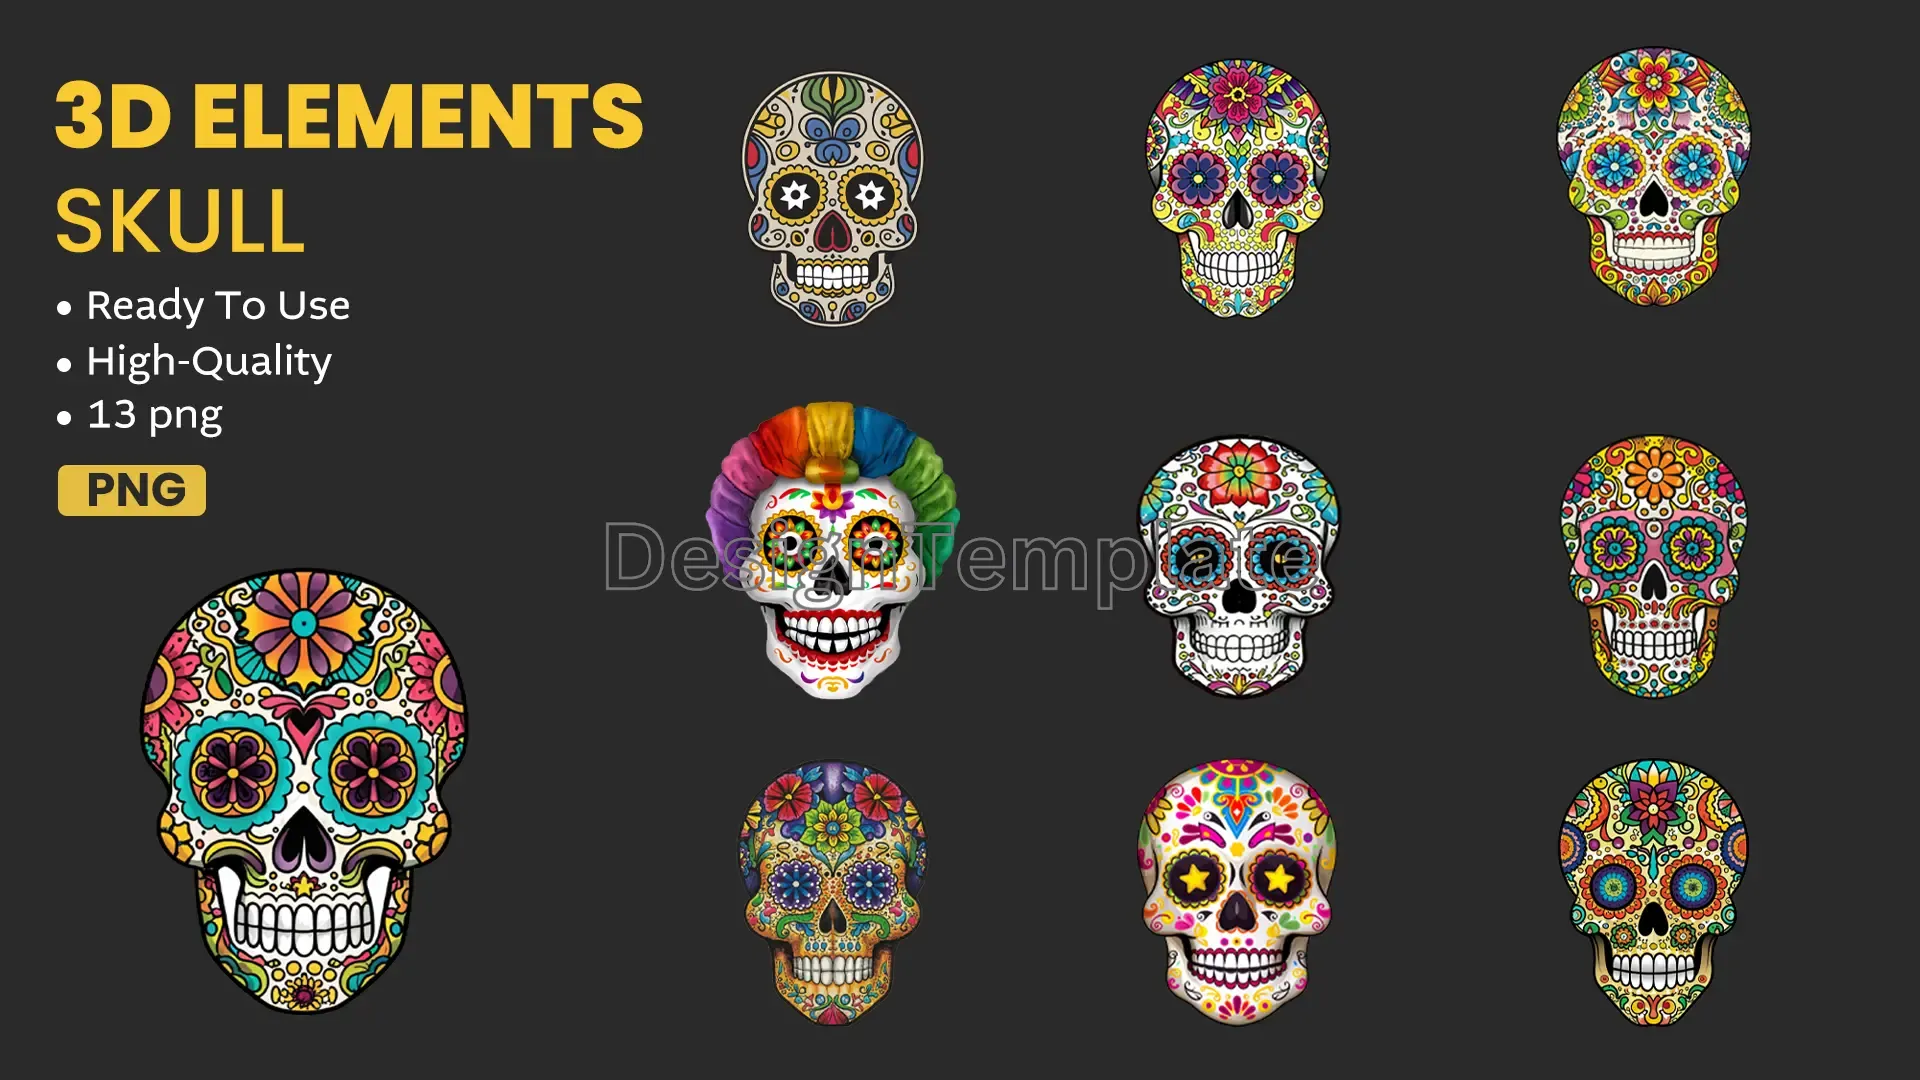 Funky Skull Decorative 3D Elements Pack image